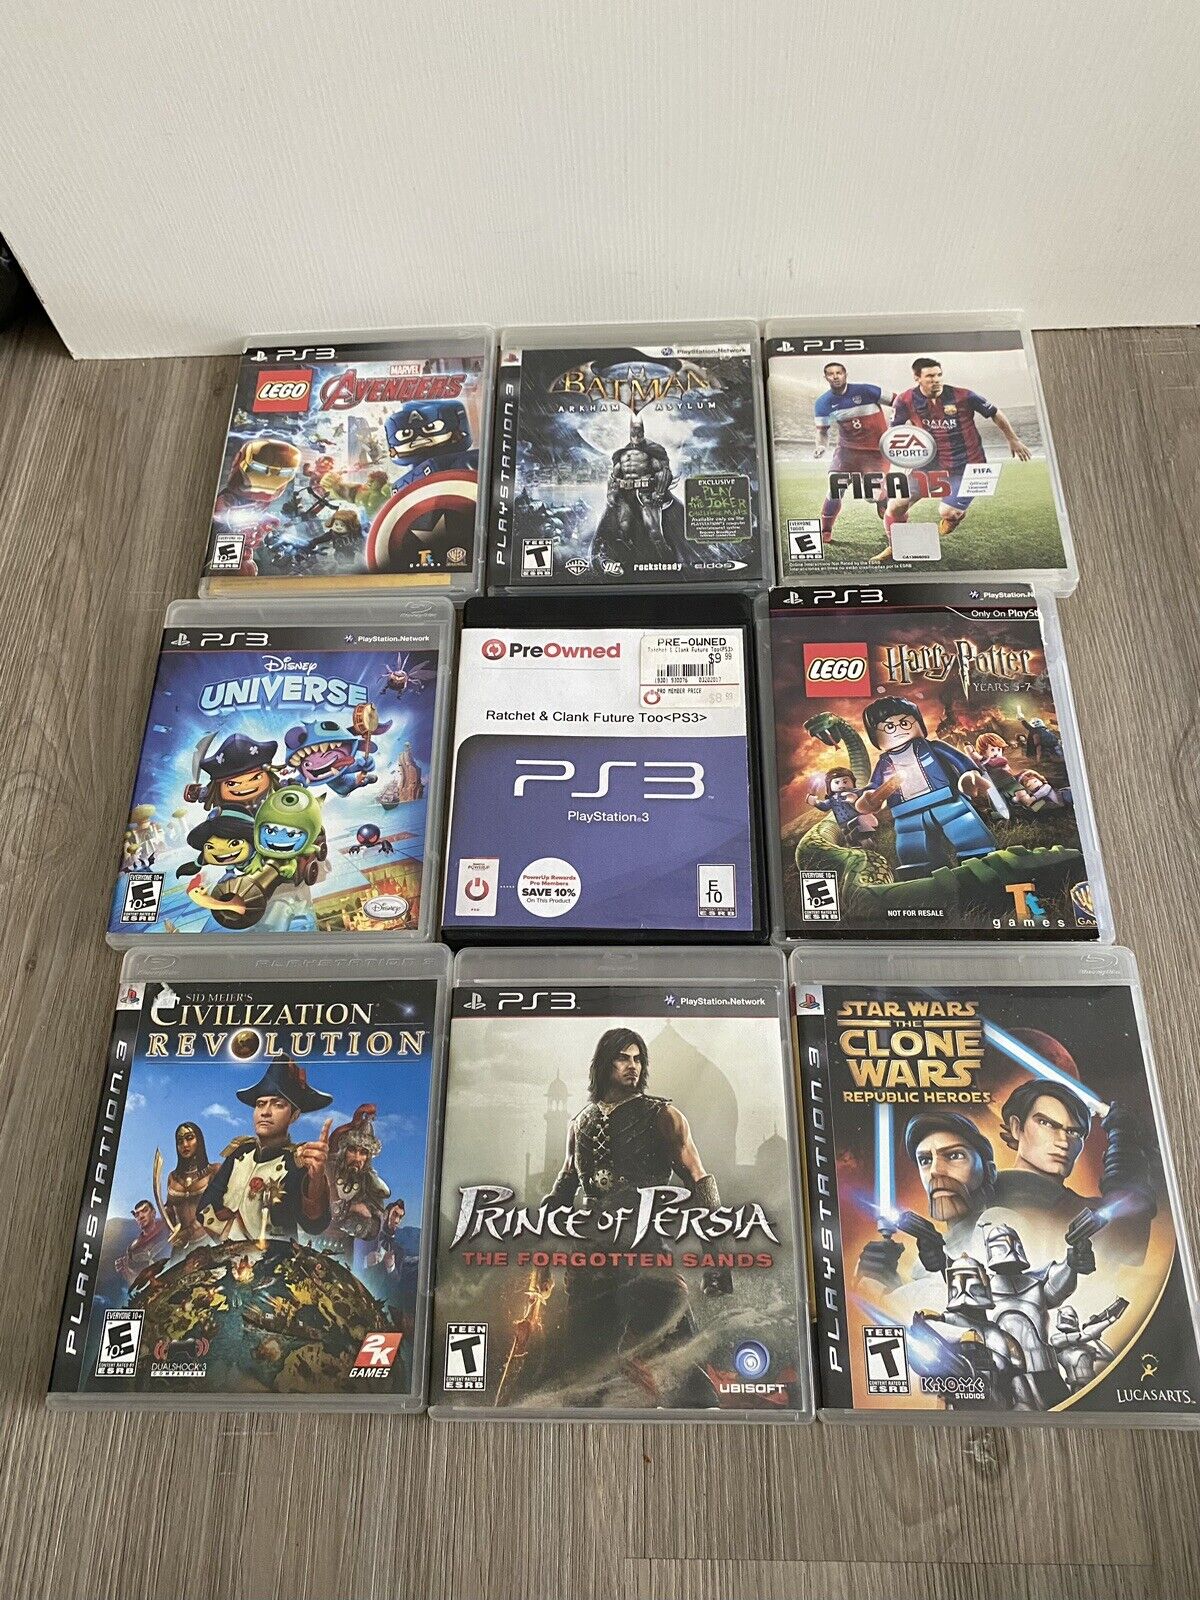 Sony PS3 PlayStation 3 Slim CECH-2001A 120GB With 9 Games And Power Cord